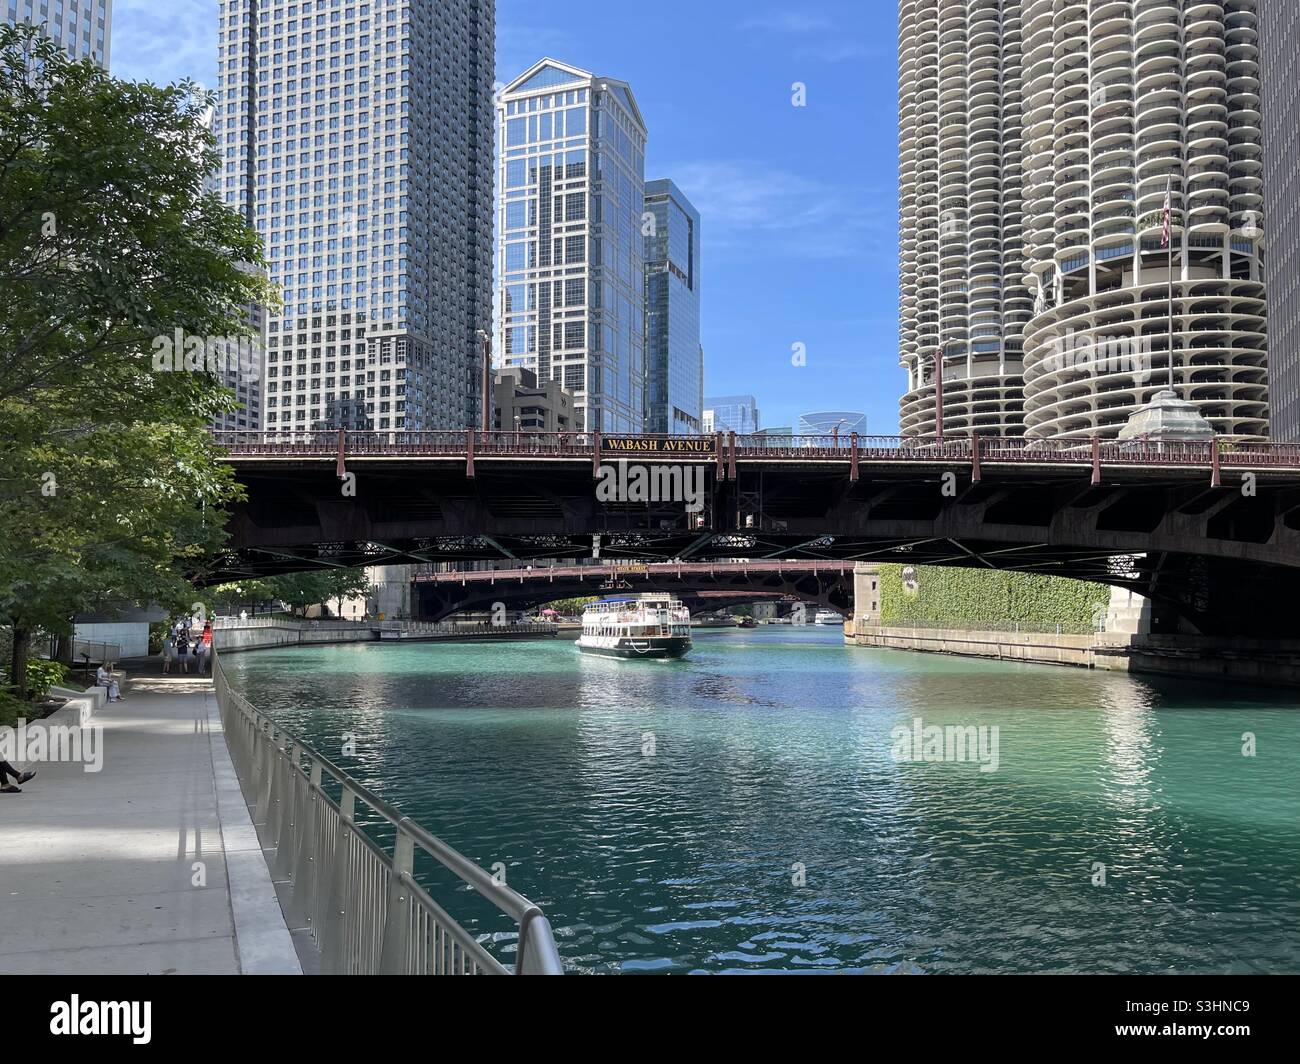 Excursion boat approaching Wabash Avenue Bridge on the Chicago River. Stock Photo